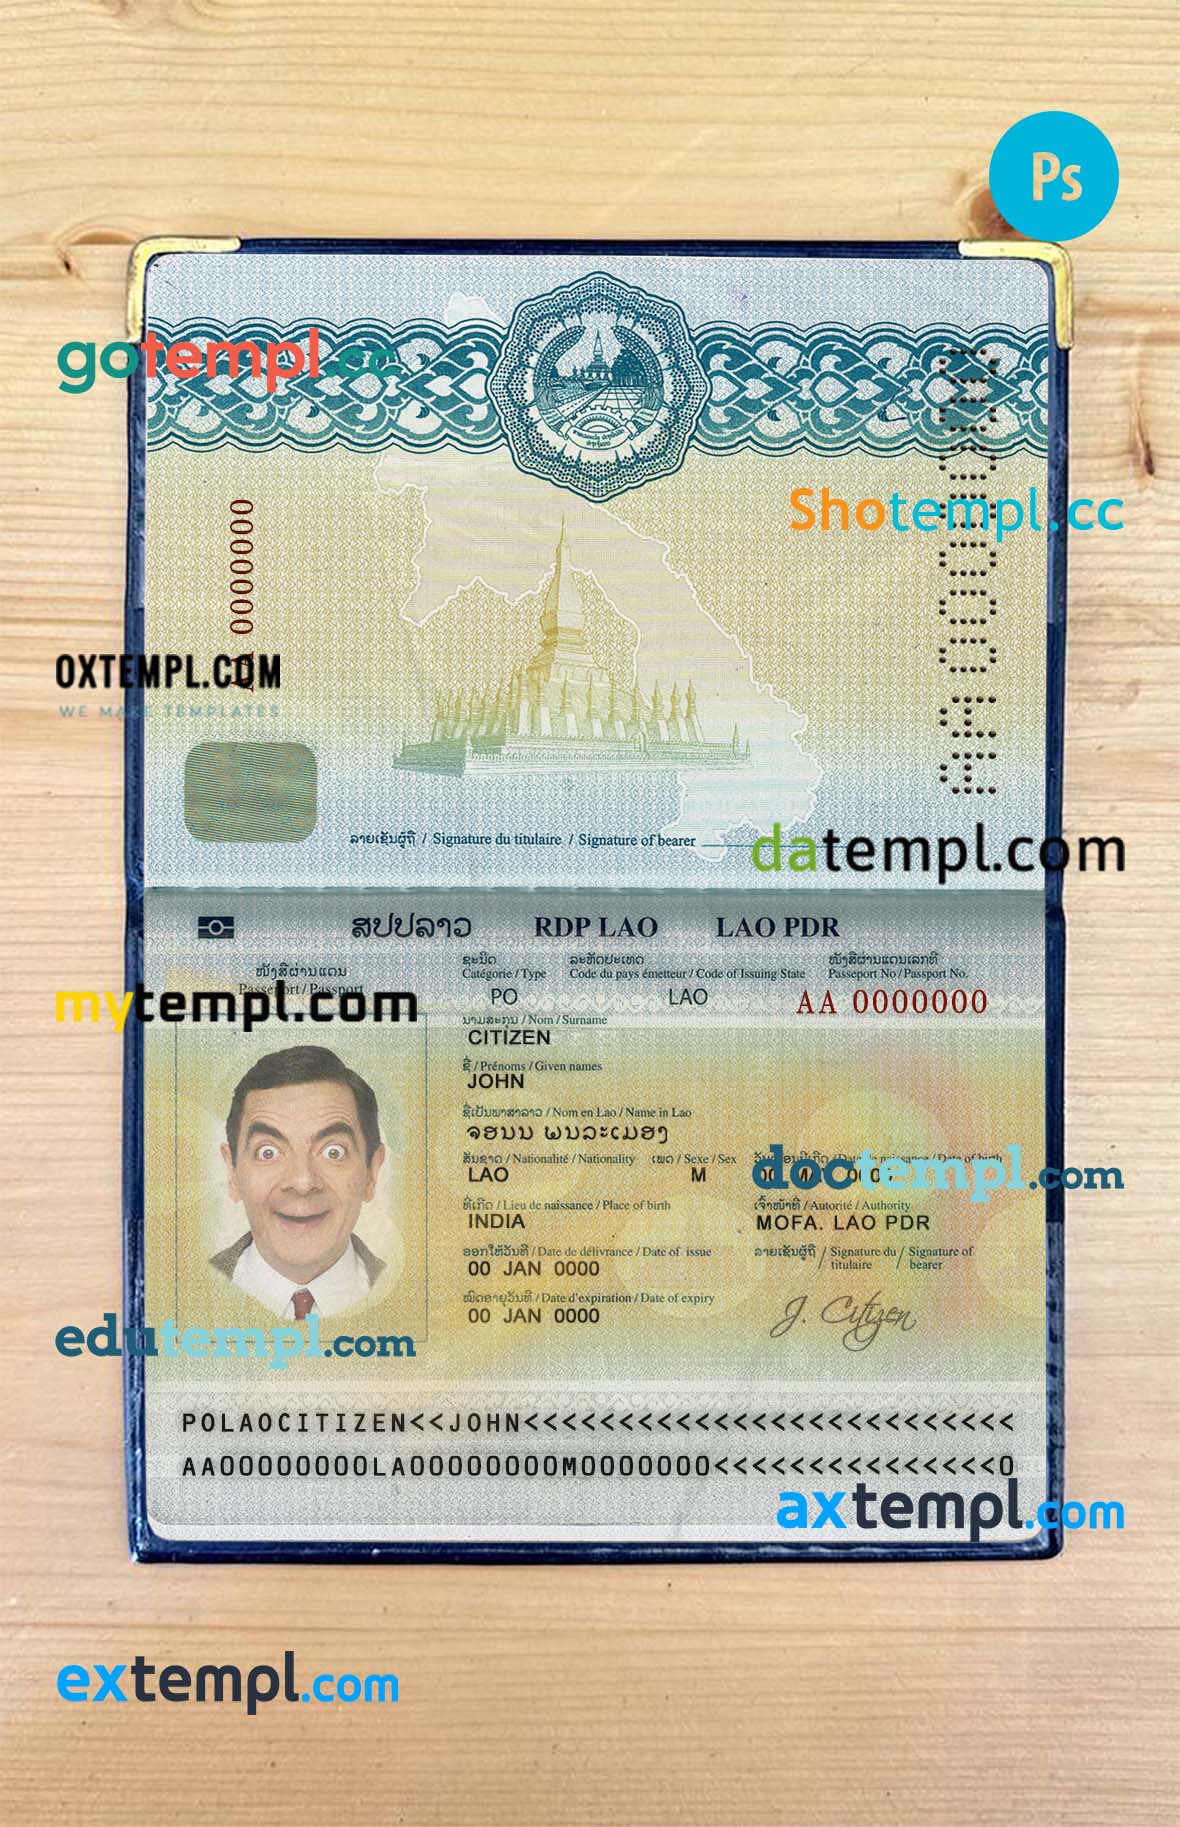 Turkey travel visa PSD template, with fonts